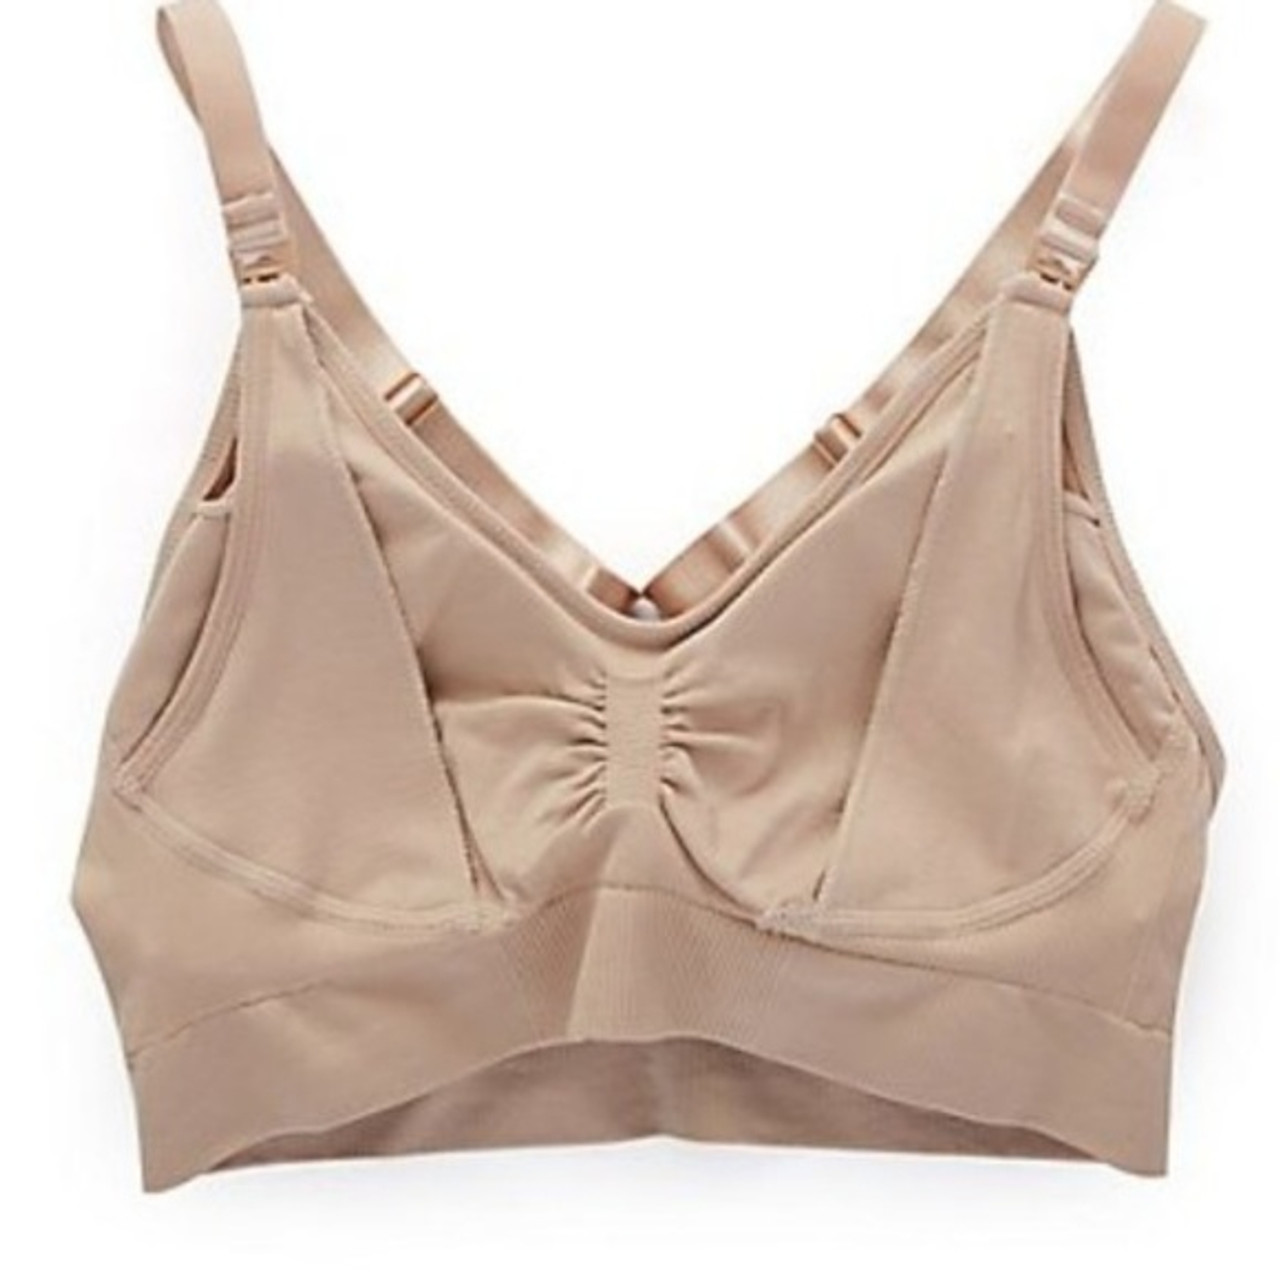 The Blossom French Terry Racerback Nursing and Sleep Bra is ultra-cozy and  features a simple crossover front that can be quickly pulled a